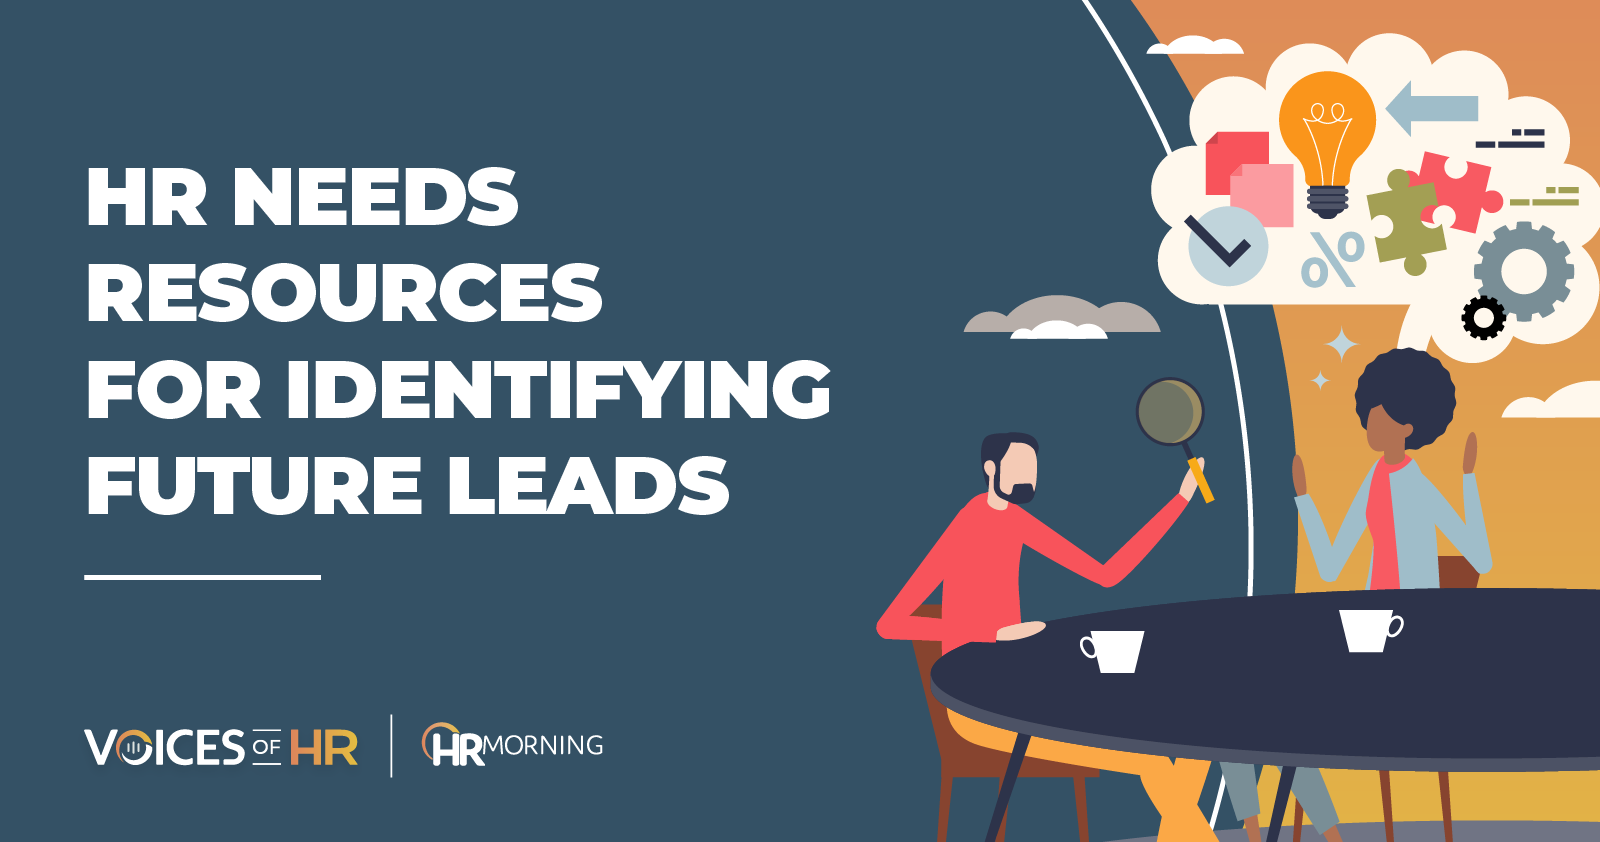 HR needs resources for identifying future leads